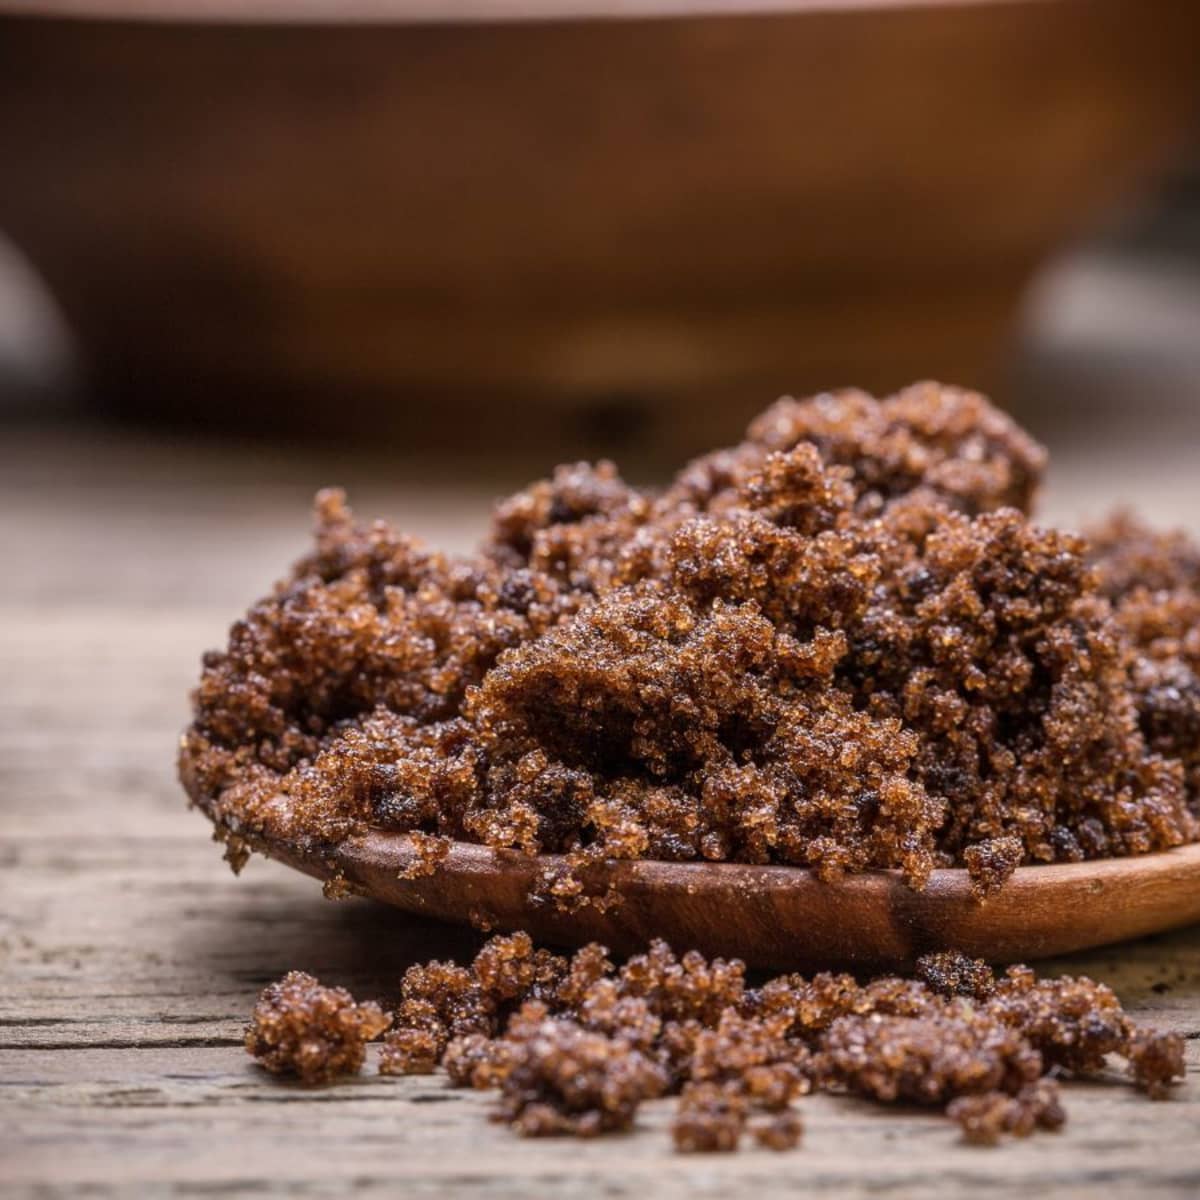 Brown Sugar Vs Muscovado Sugar: What's The Difference?